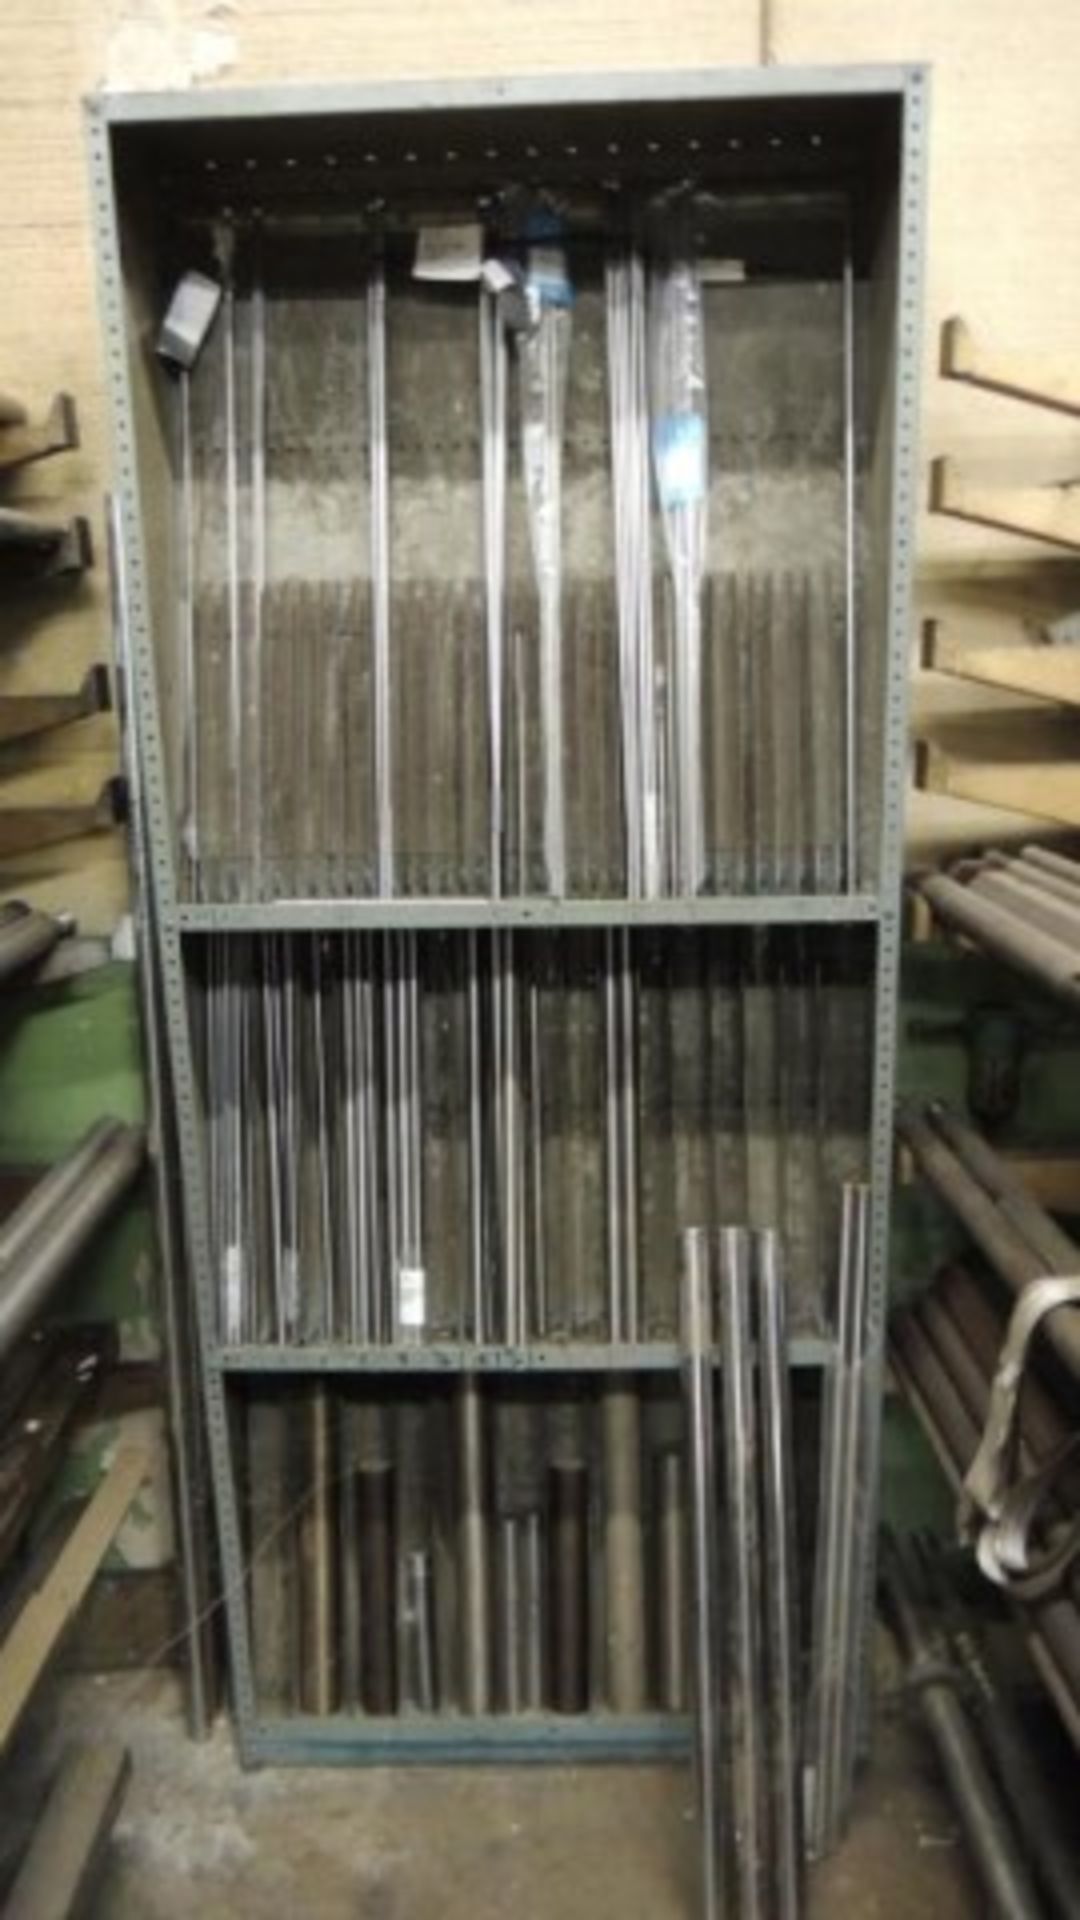 Cantilever Racks - Image 7 of 8